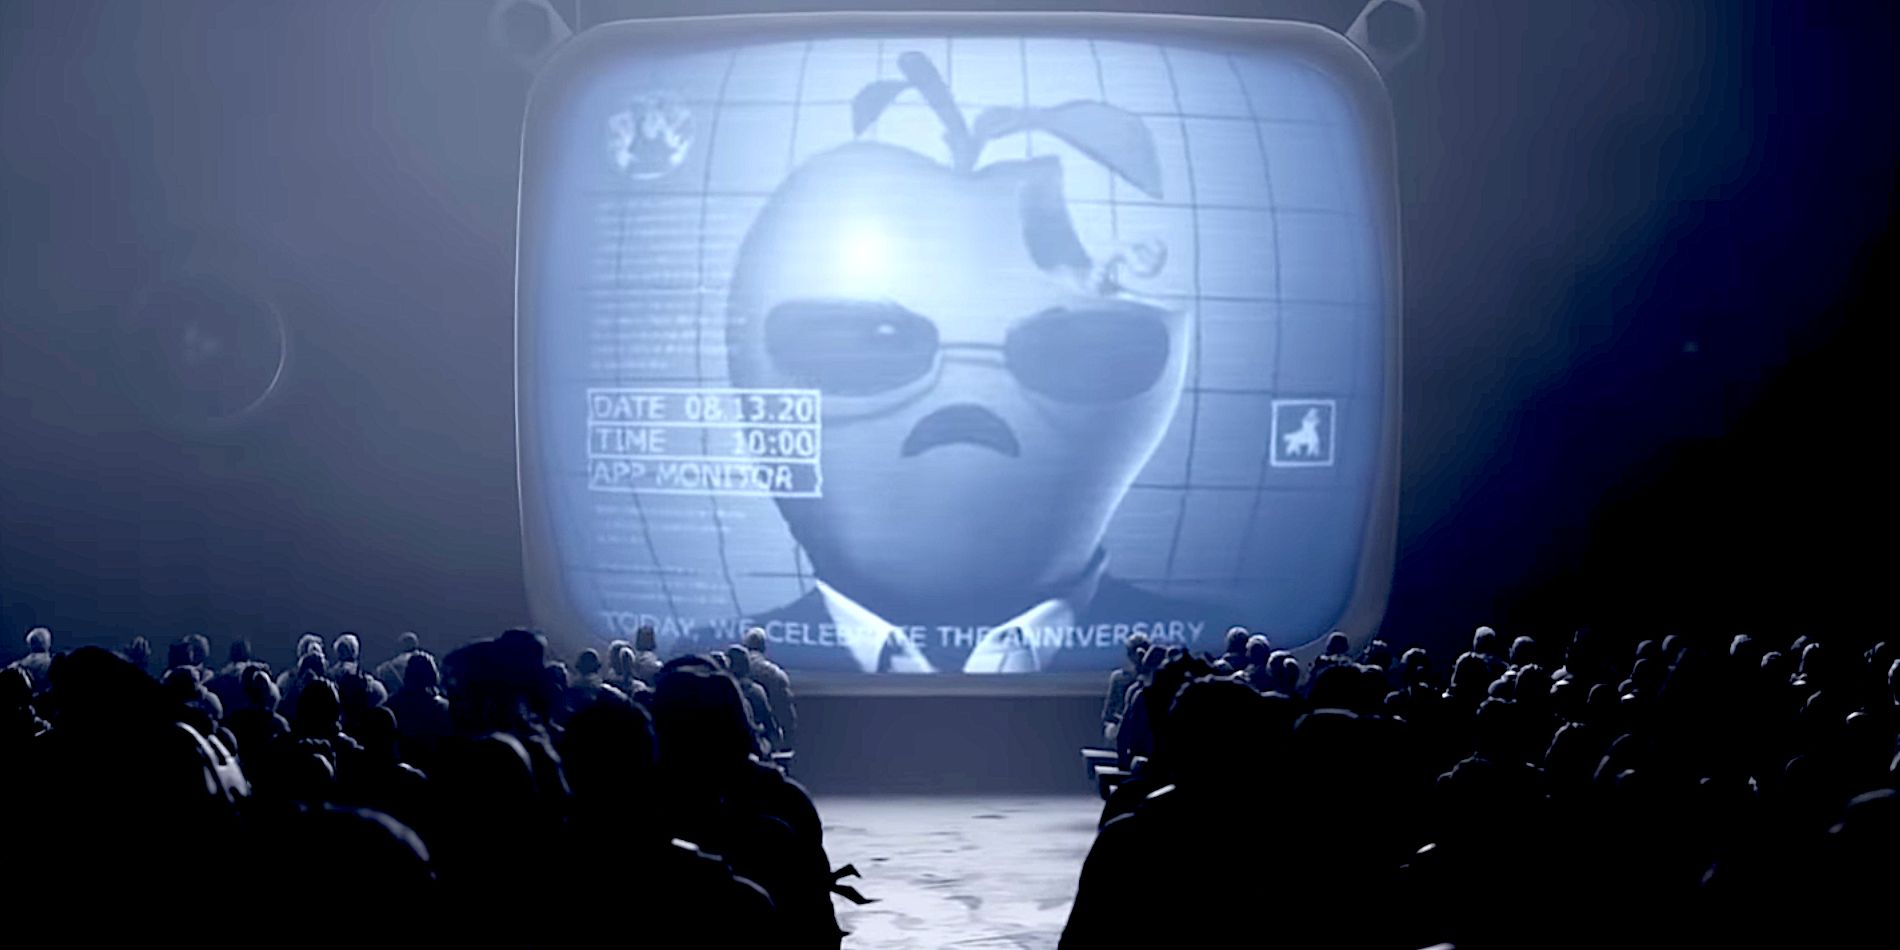 A black-and-white screen showing an apple wearing sunglasses in parody of Apple's classic 